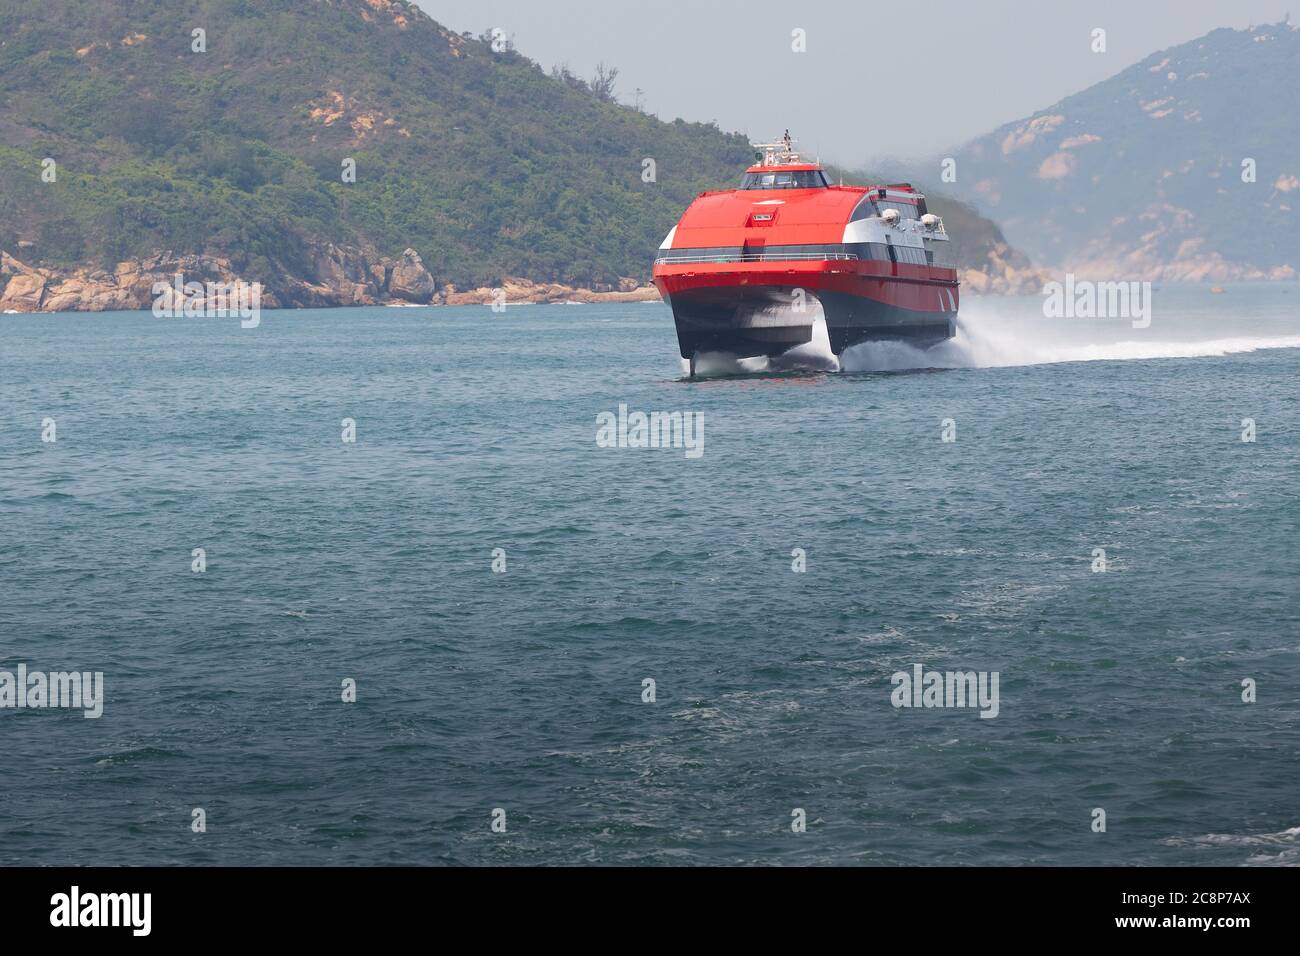 TurboJet Hydrofoil Foilcat, PENHA, Underway At High Speed From Macau To Hong Kong. Stock Photo